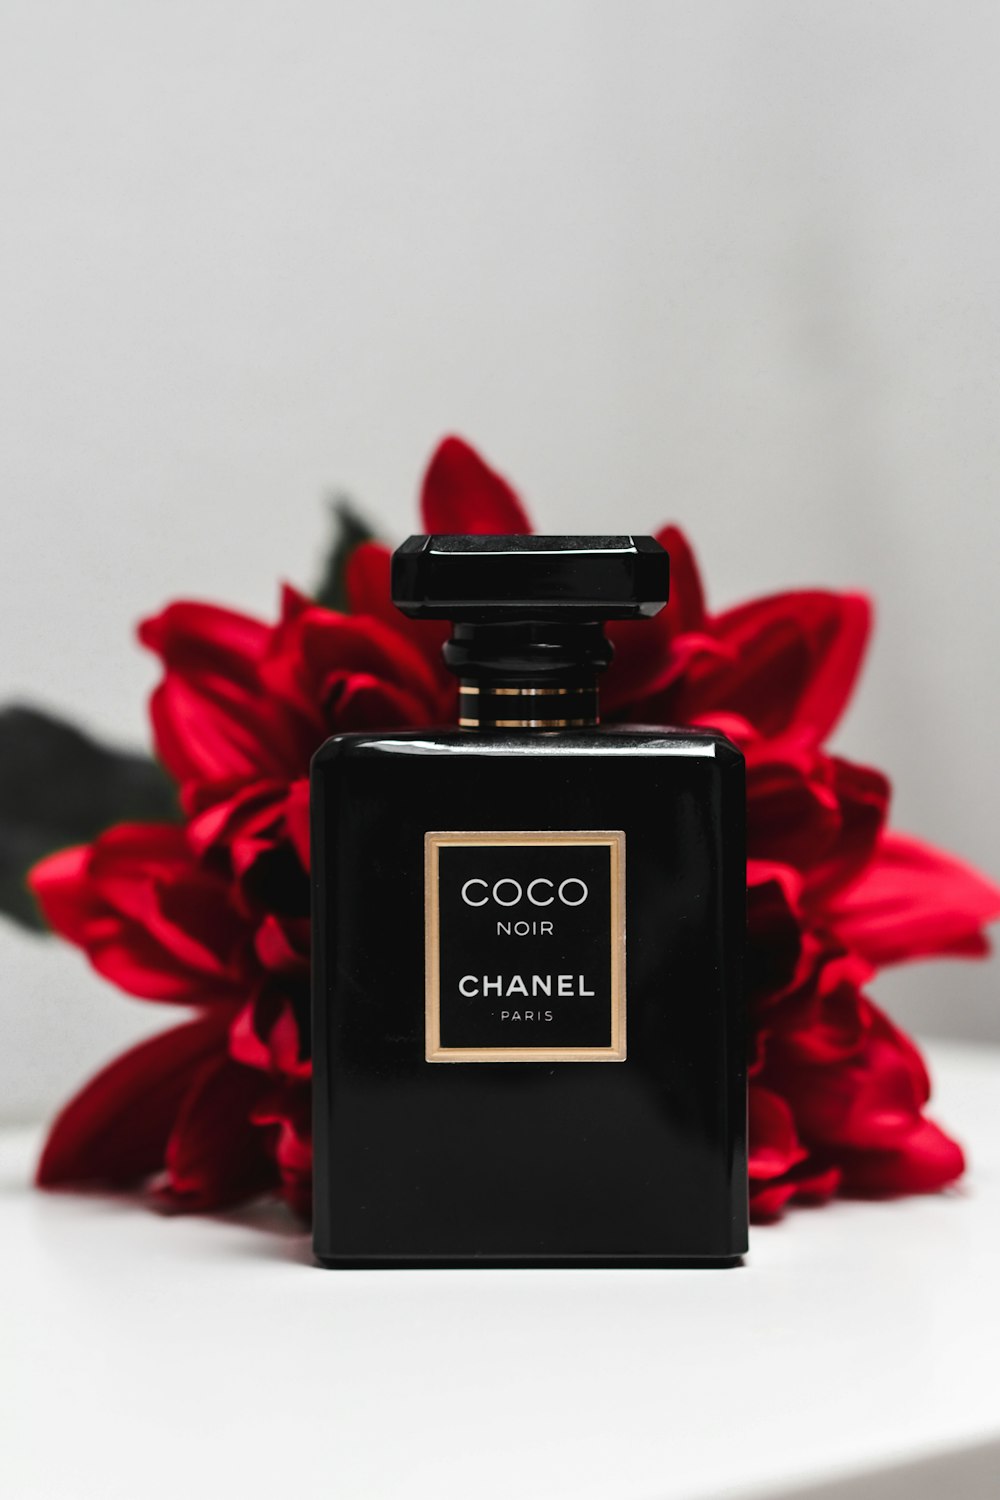 Chanel Perfume Pictures Download Free Images On Unsplash